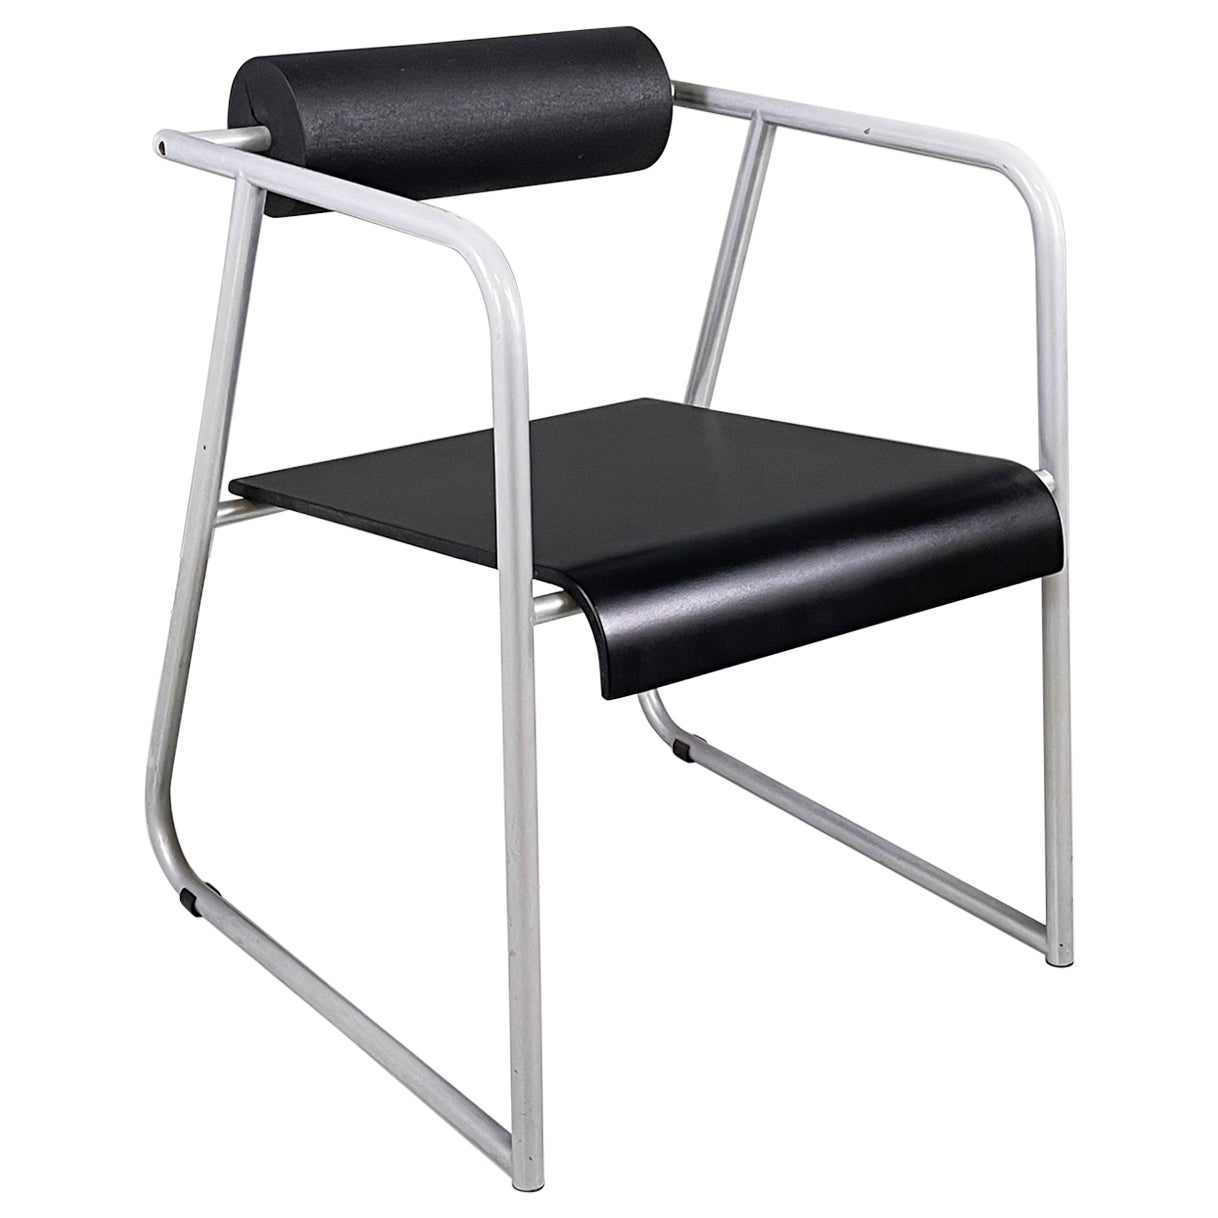 Italian modern Chair in gray metal, black rubber and wood, 1980s